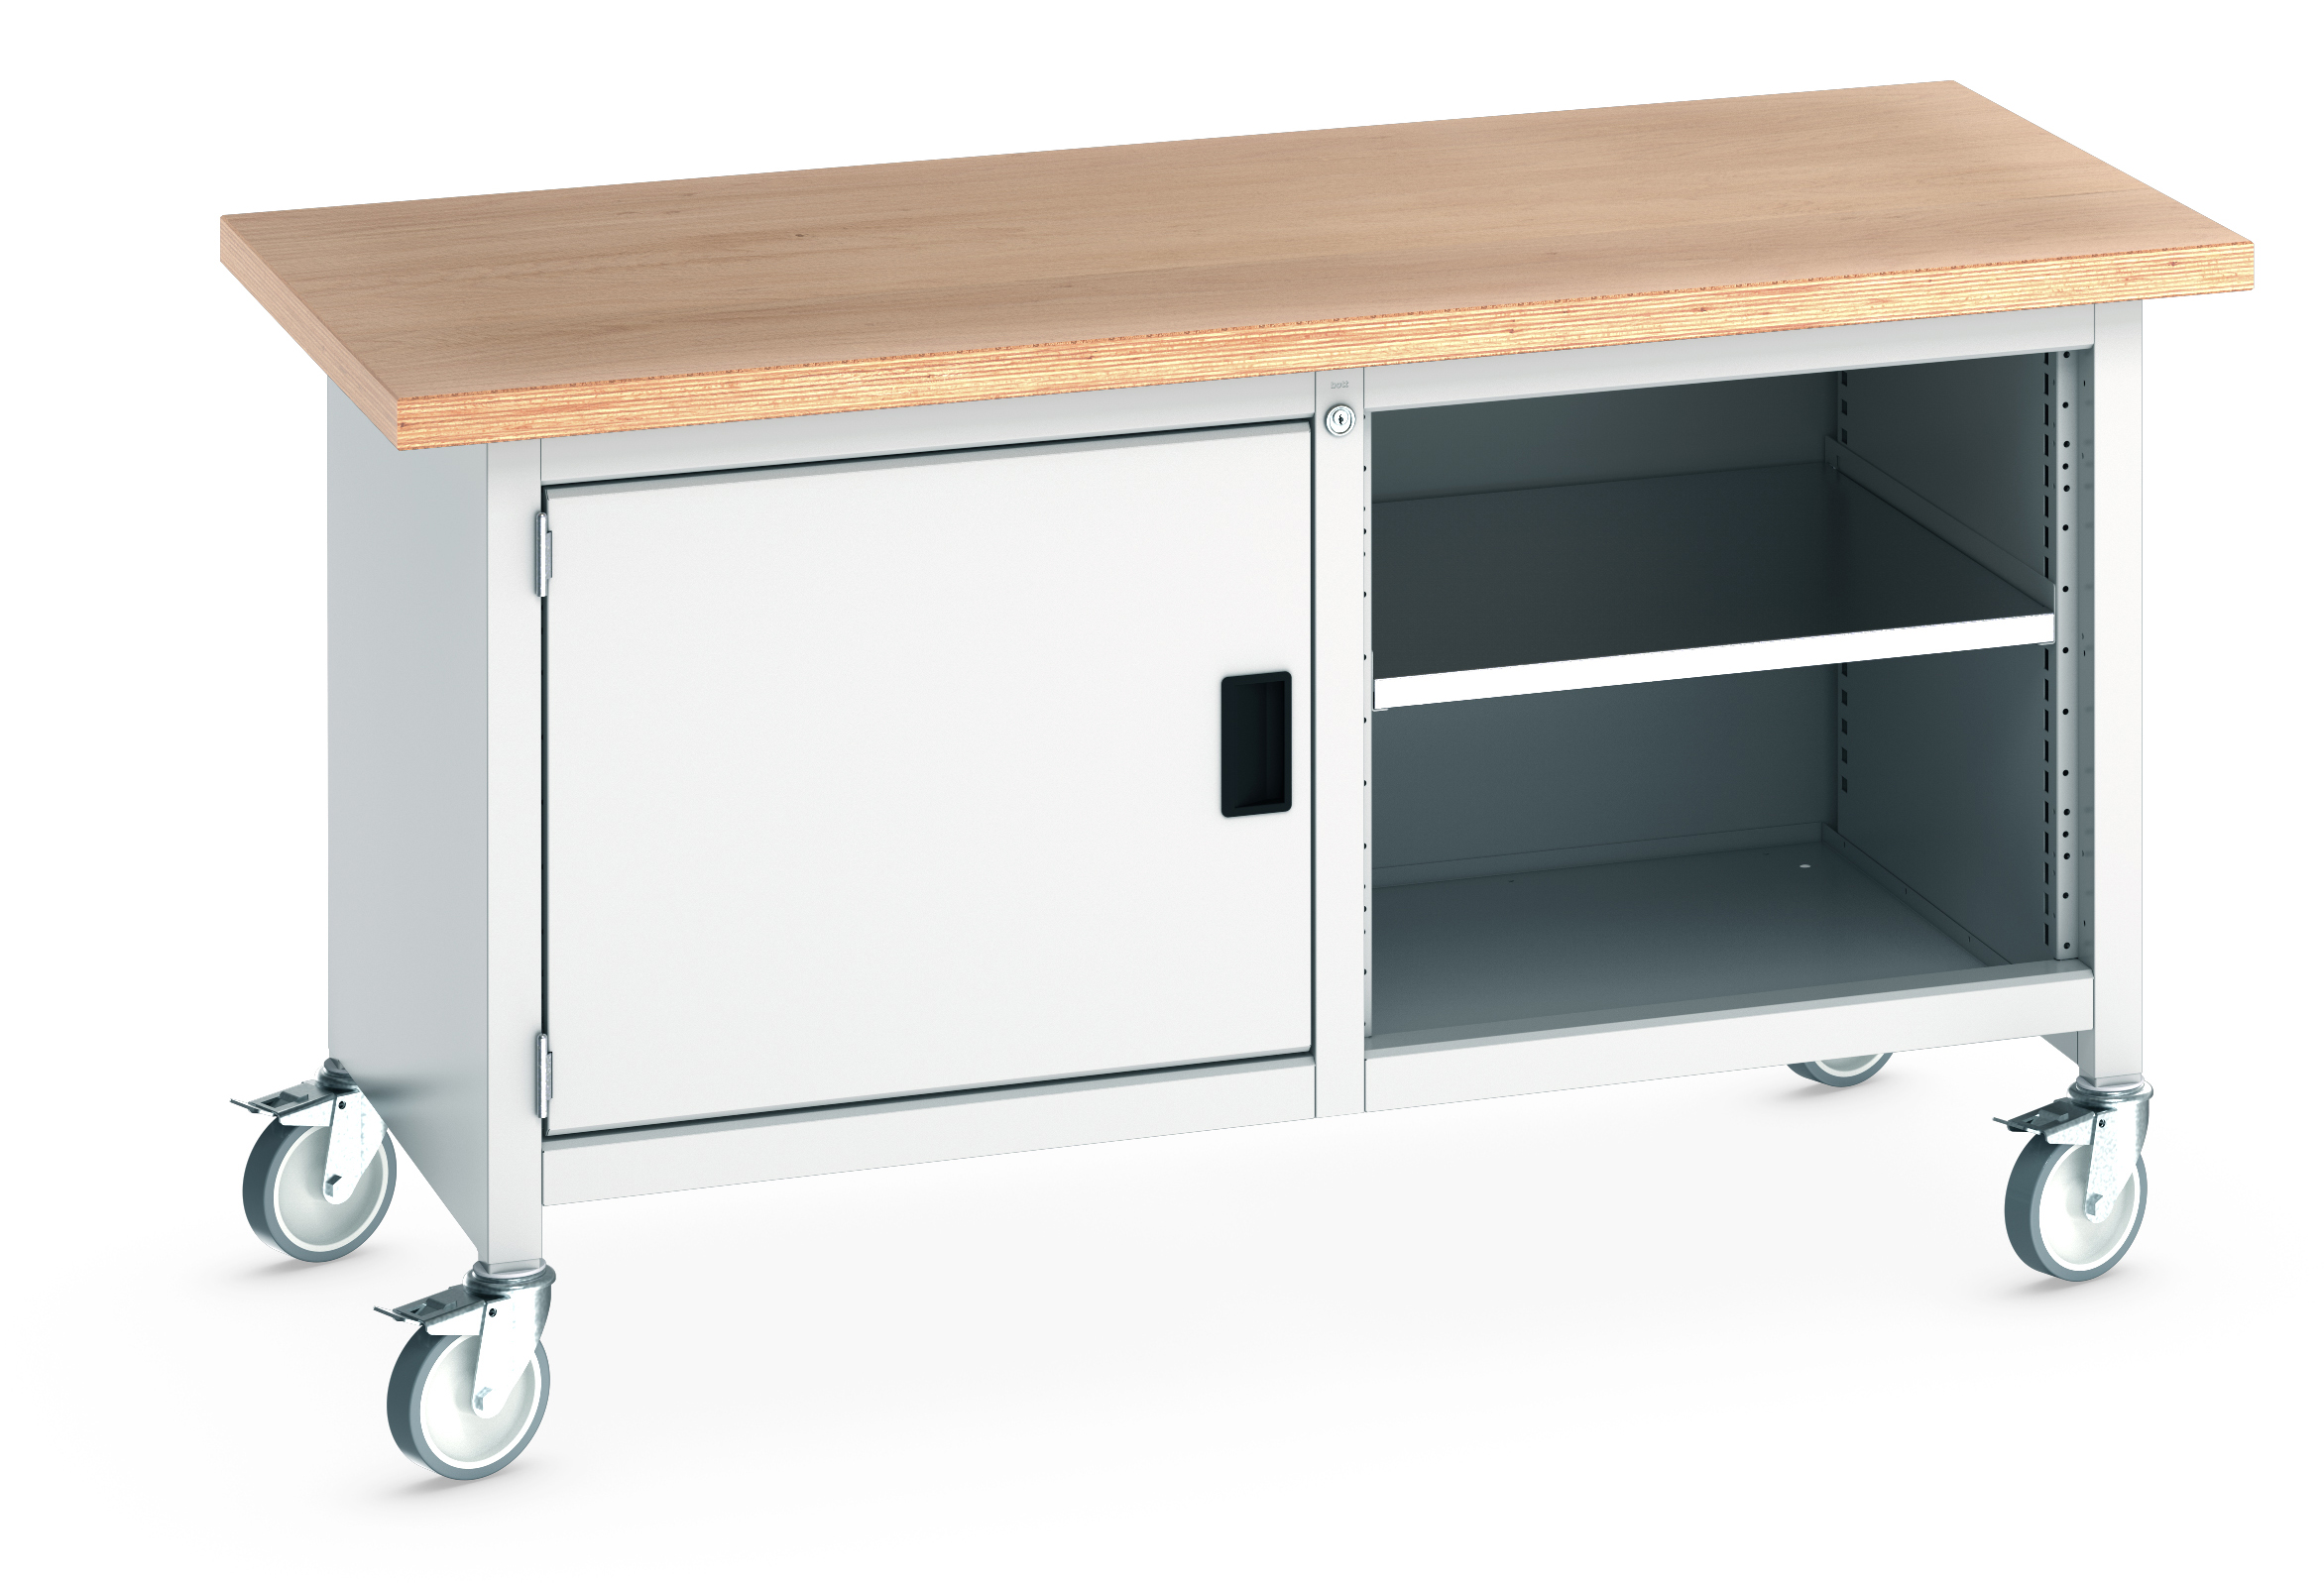 Bott Cubio Mobile Storage Bench With Full Cupboard / Open Cupboard - 41002094.16V